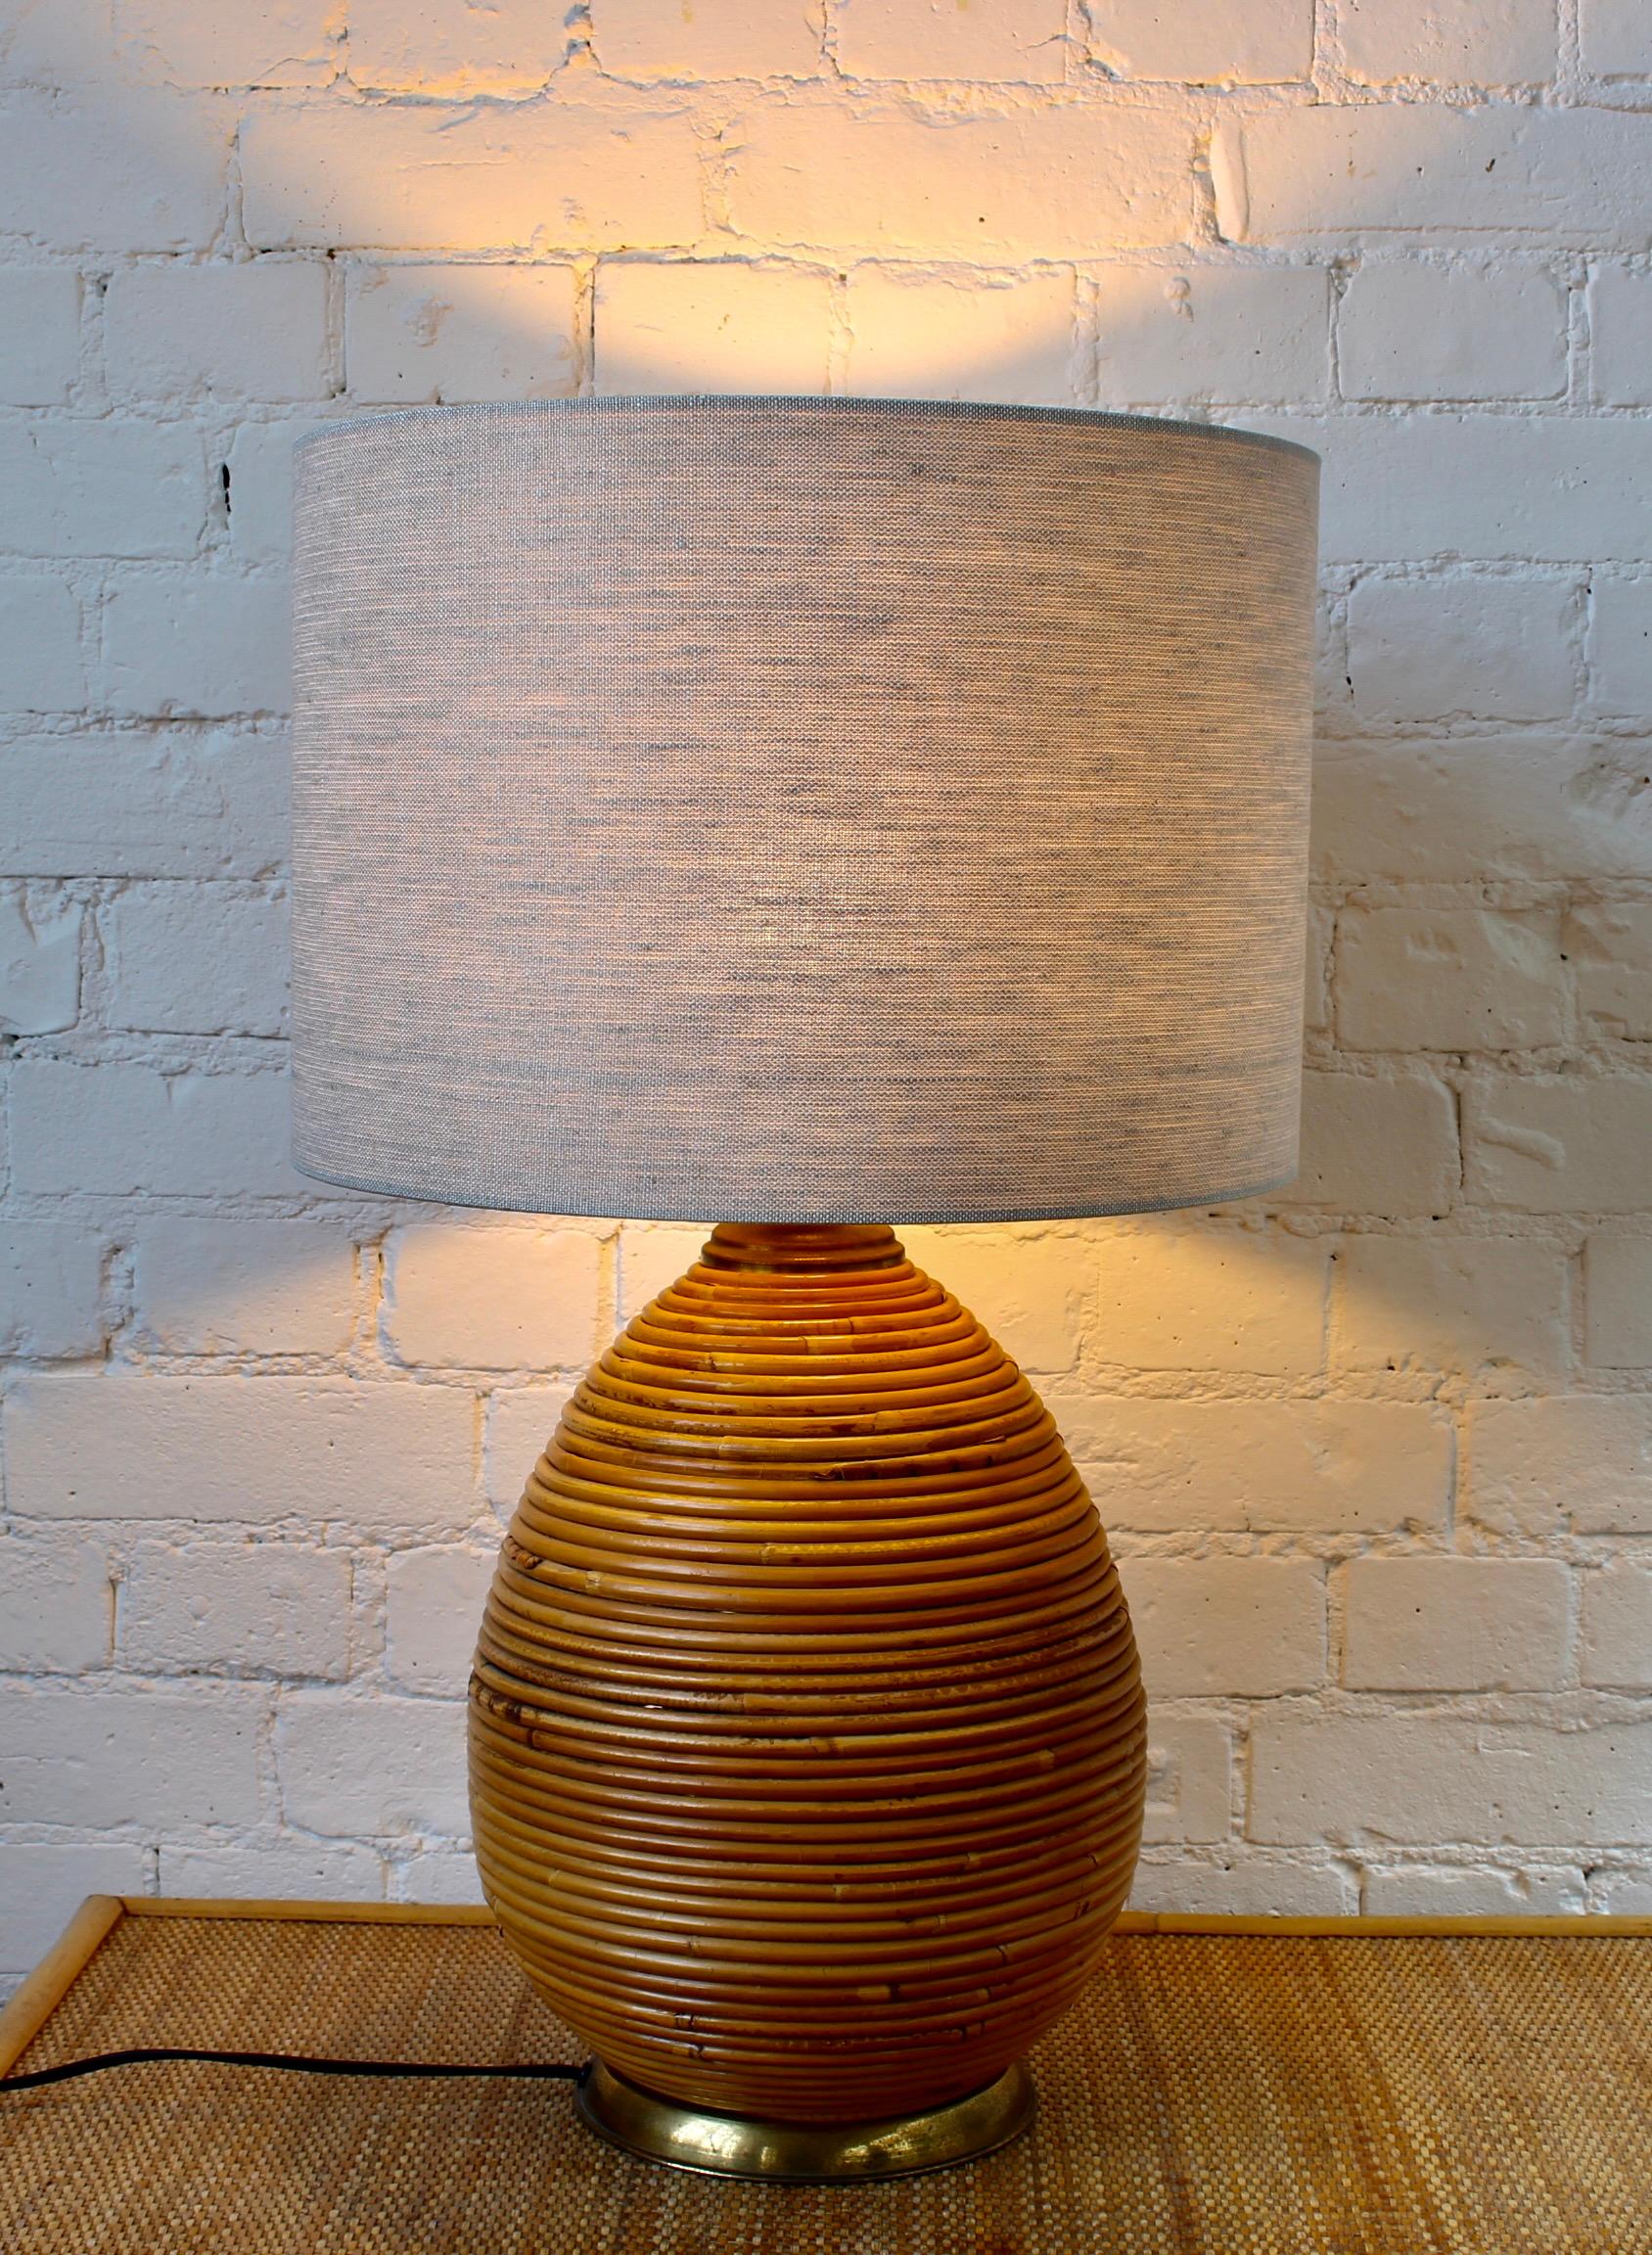 Vintage Italian rattan table lamp attributed to Vivai del Sud (circa 1970s). Stunning cane reeds of circular rattan which rise in concentric circles from a brass-finish base. It transports one immediately to the sun and sand of the Italian Riviera.